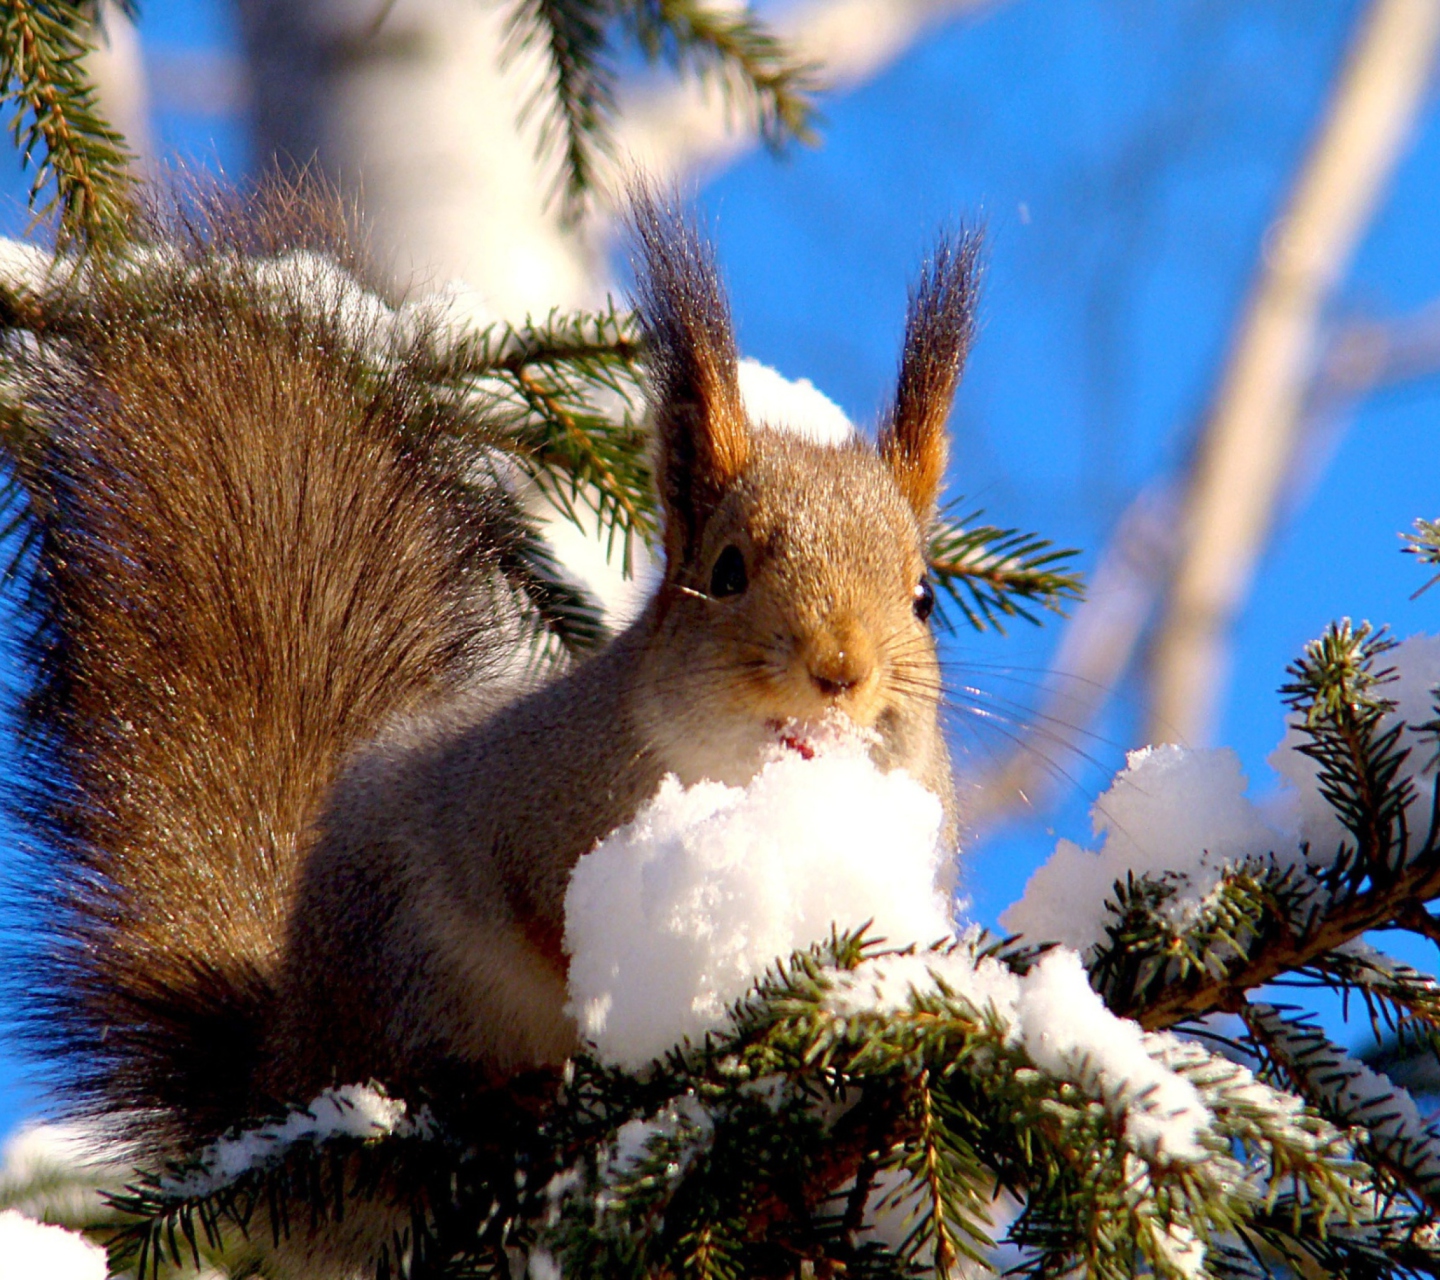 Squirrel Eating Snow wallpaper 1440x1280